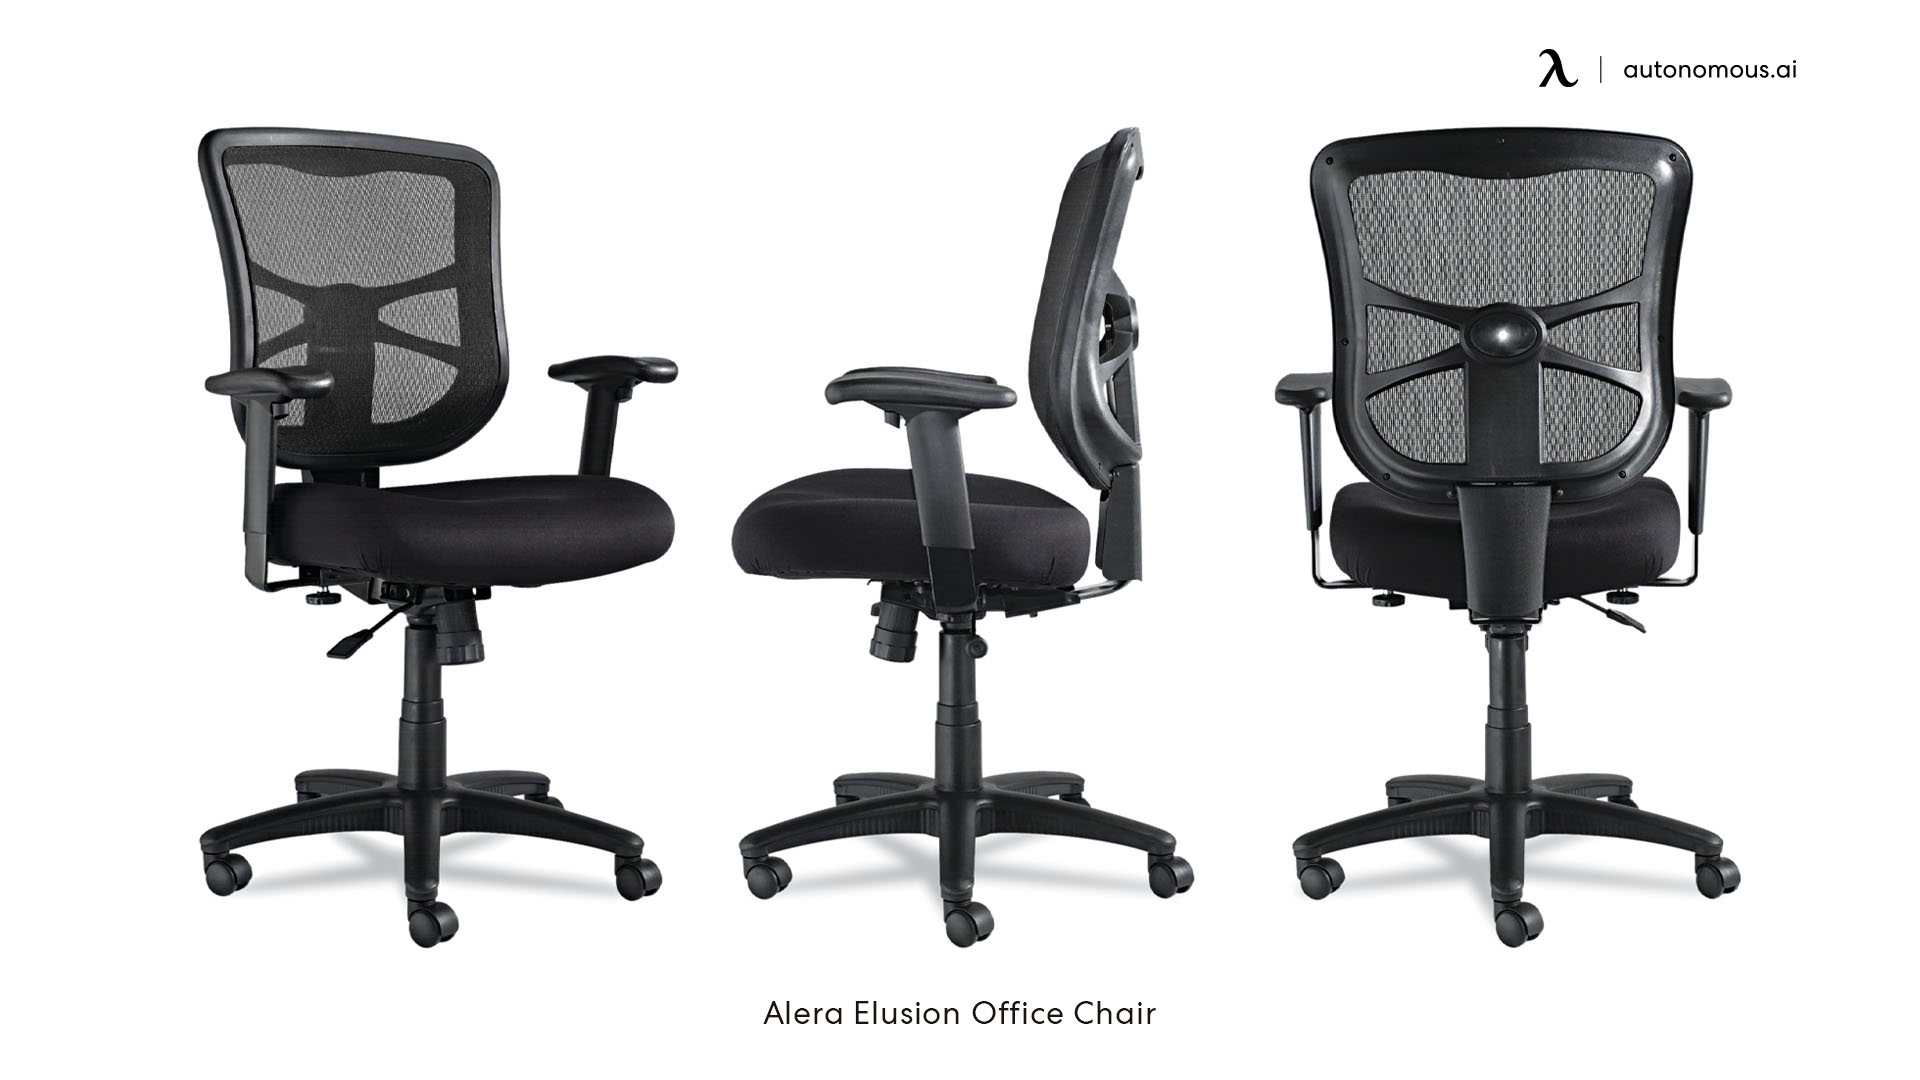 Alera Elusion high back office chair